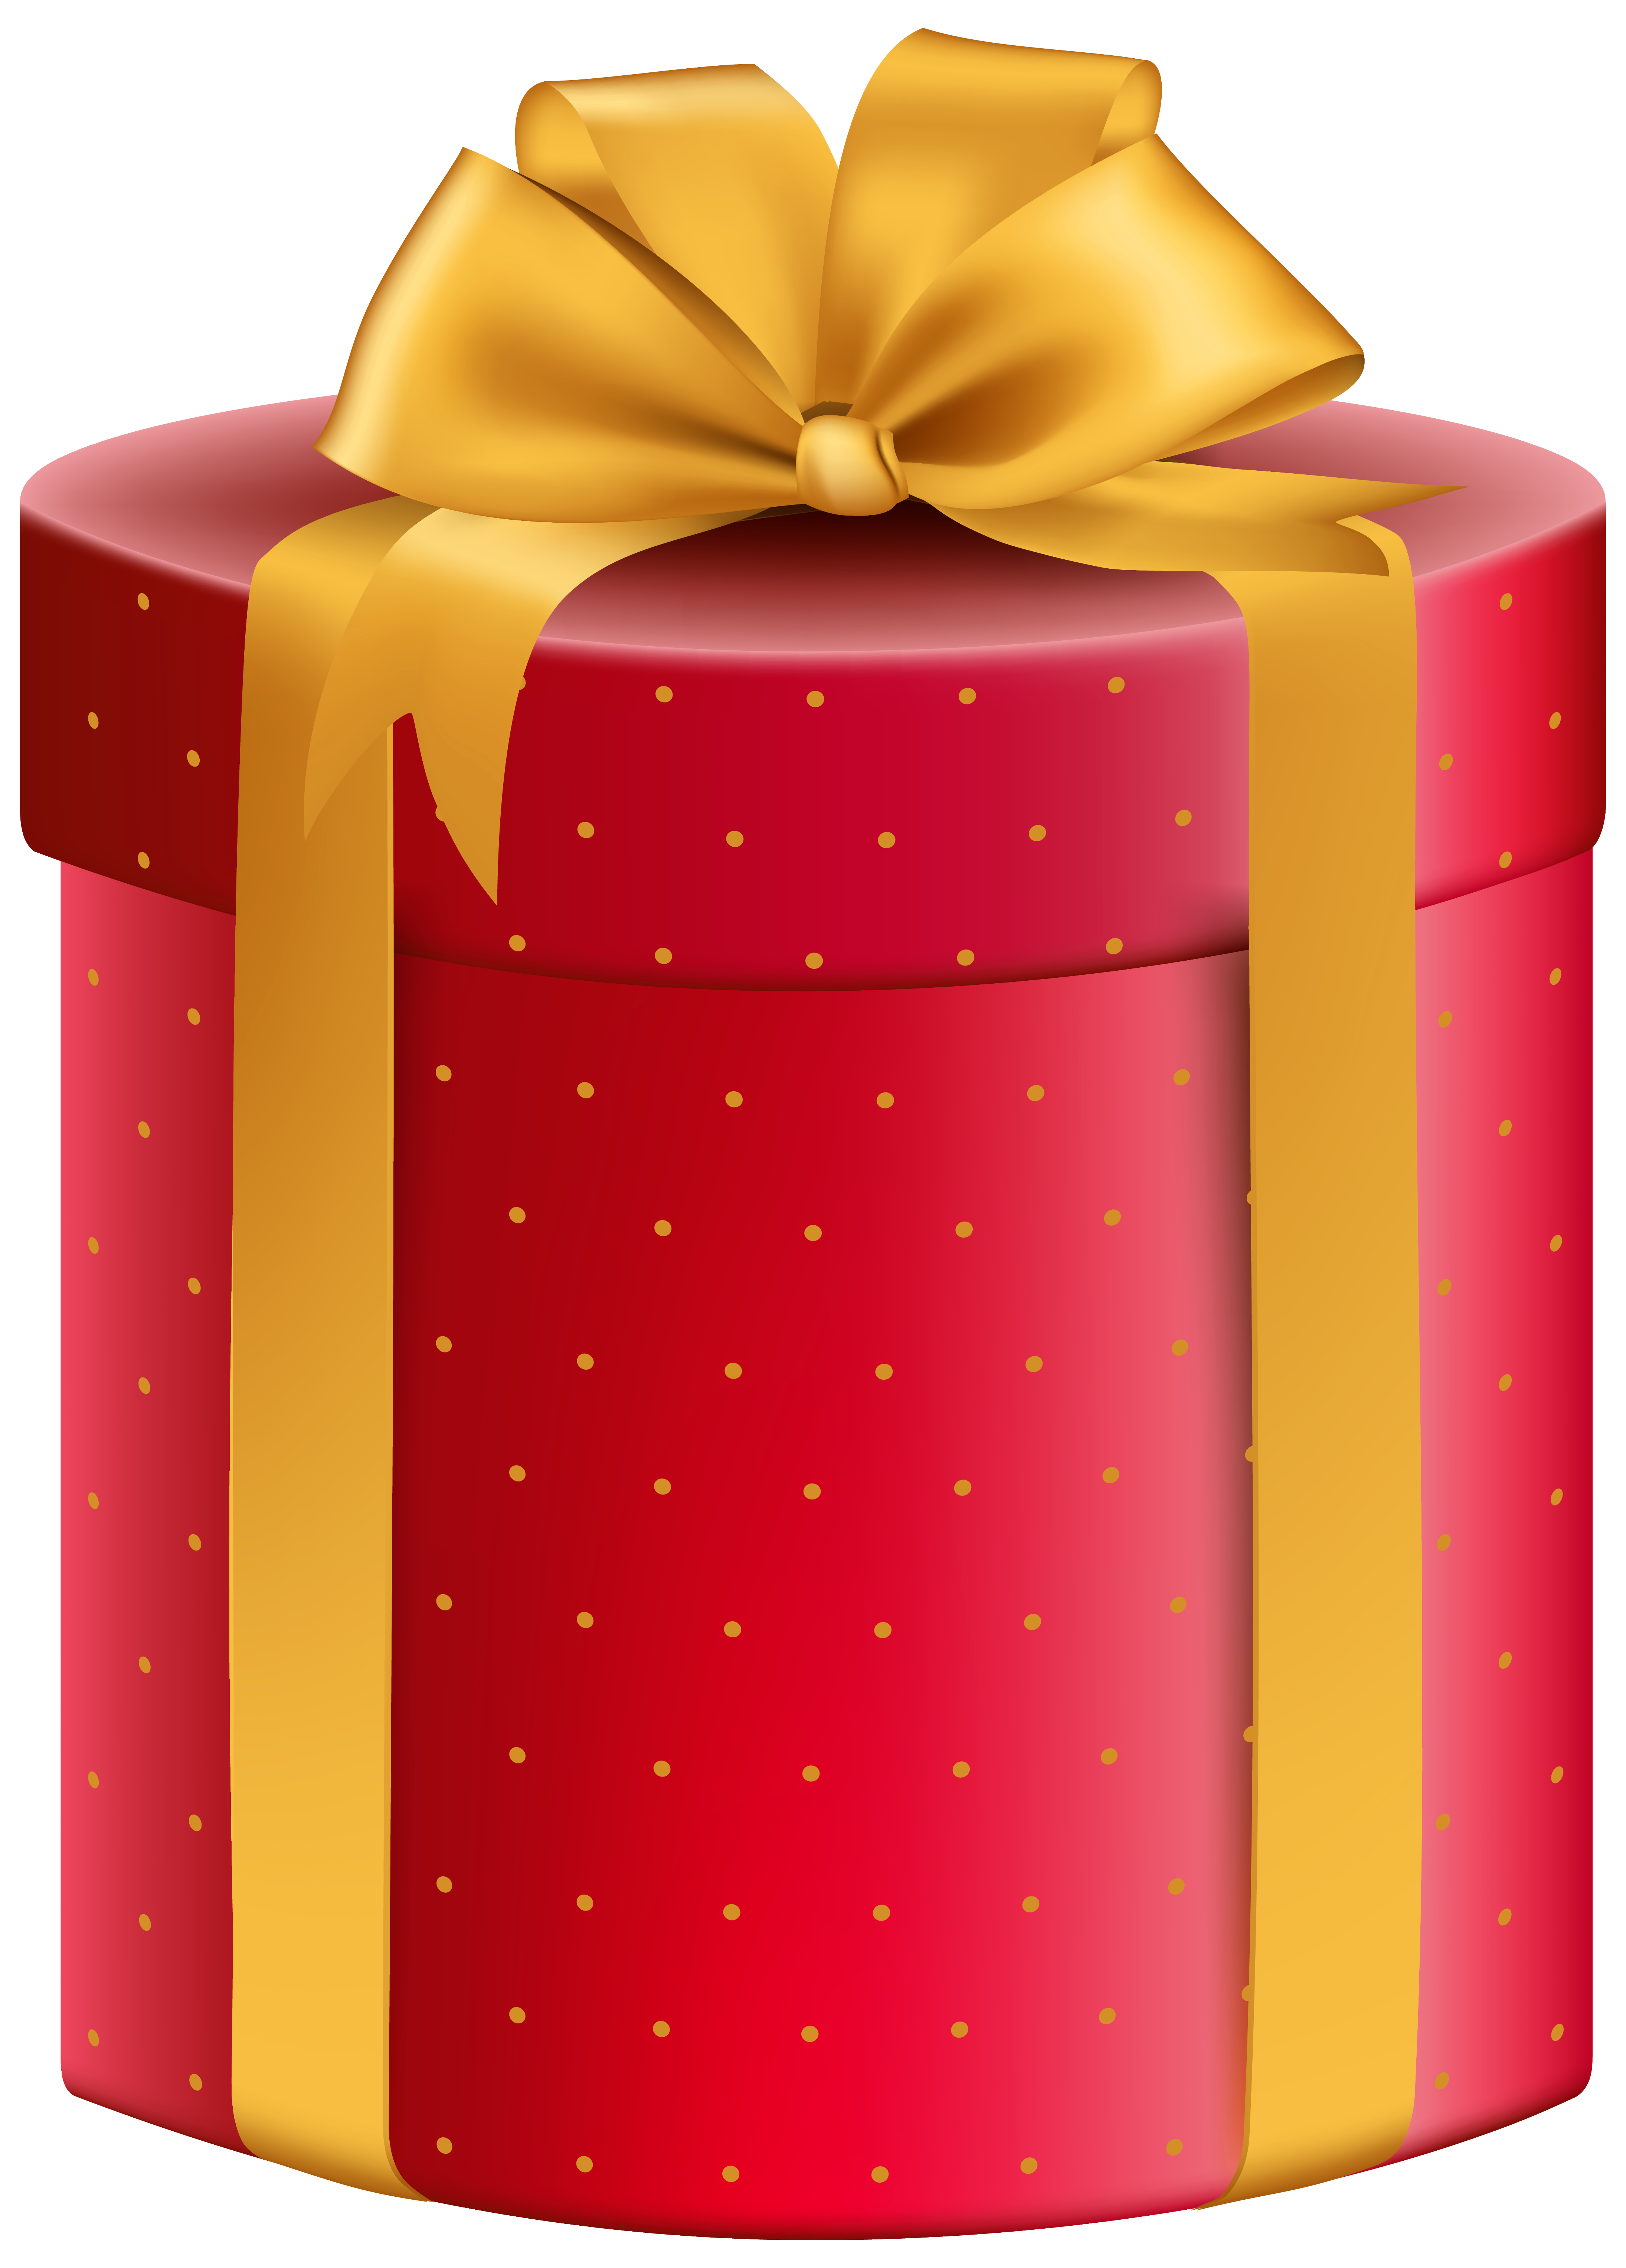 Red Yellow Gift Box PNG Clipart Image